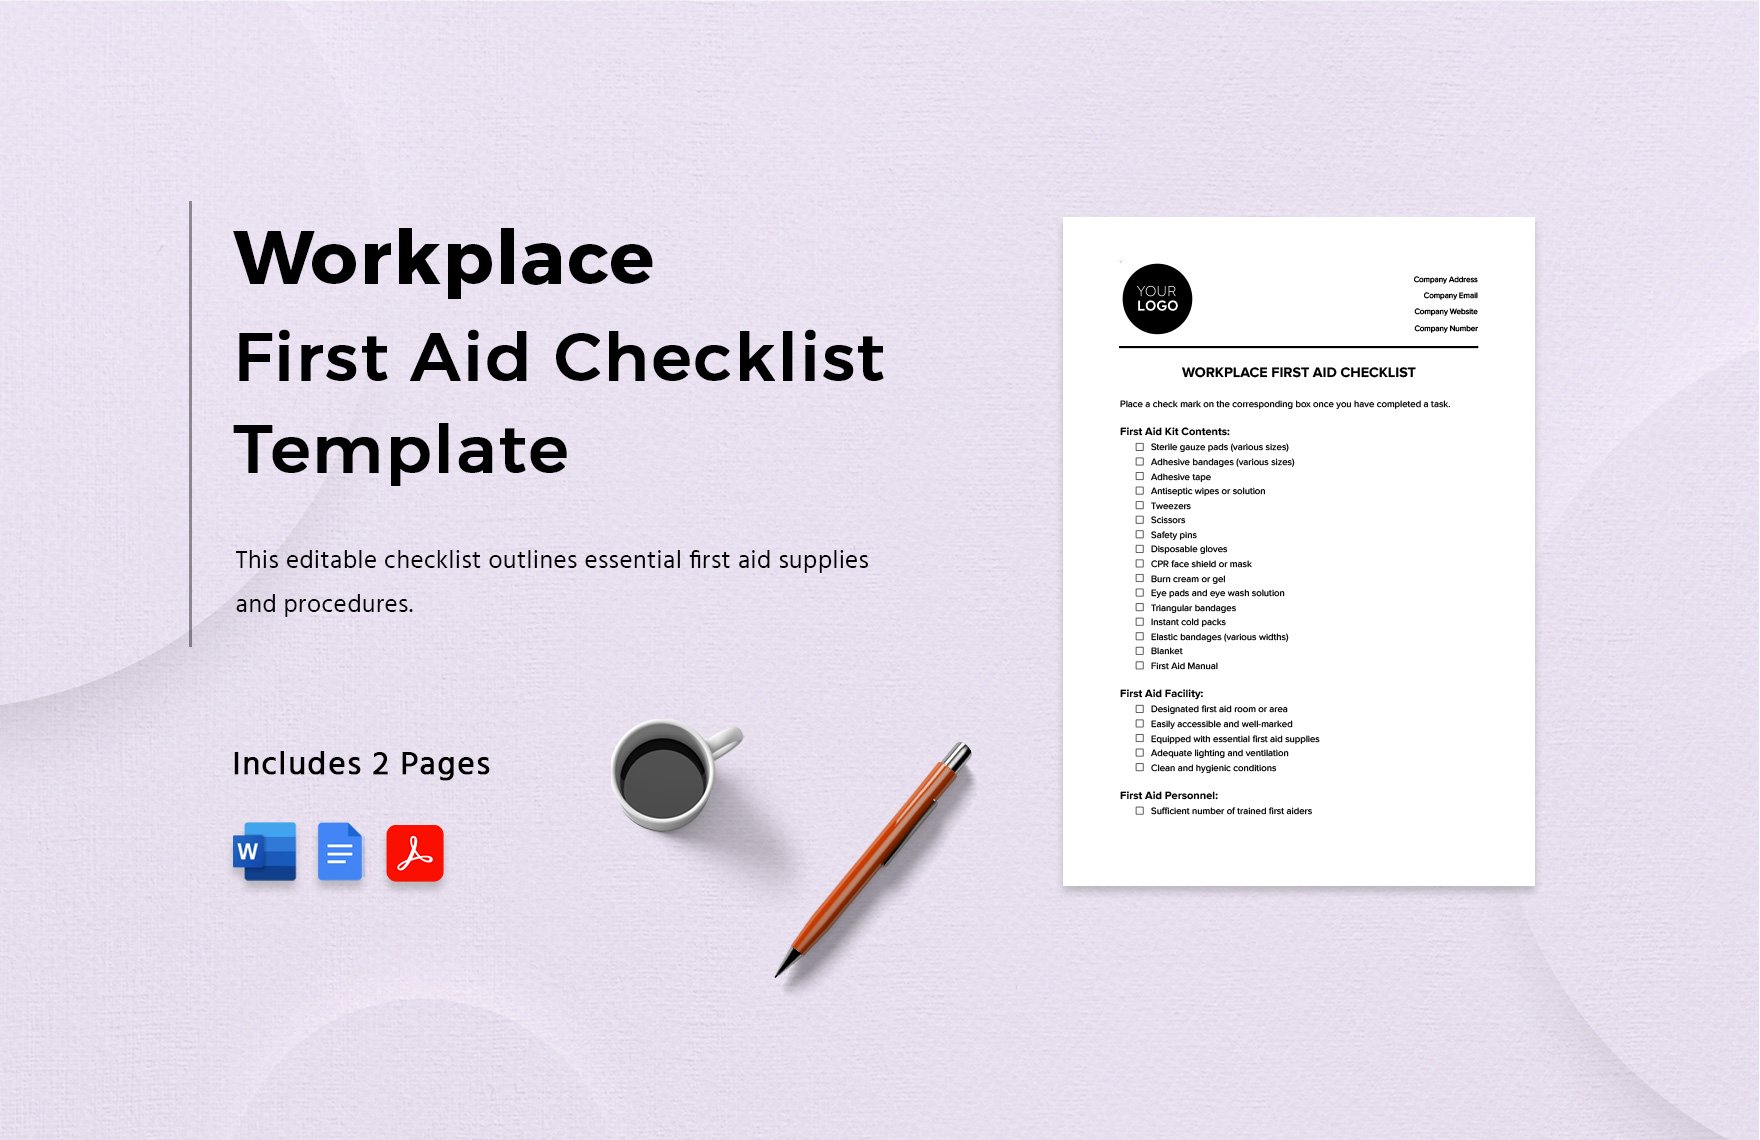 Workplace First Aid Checklist Template